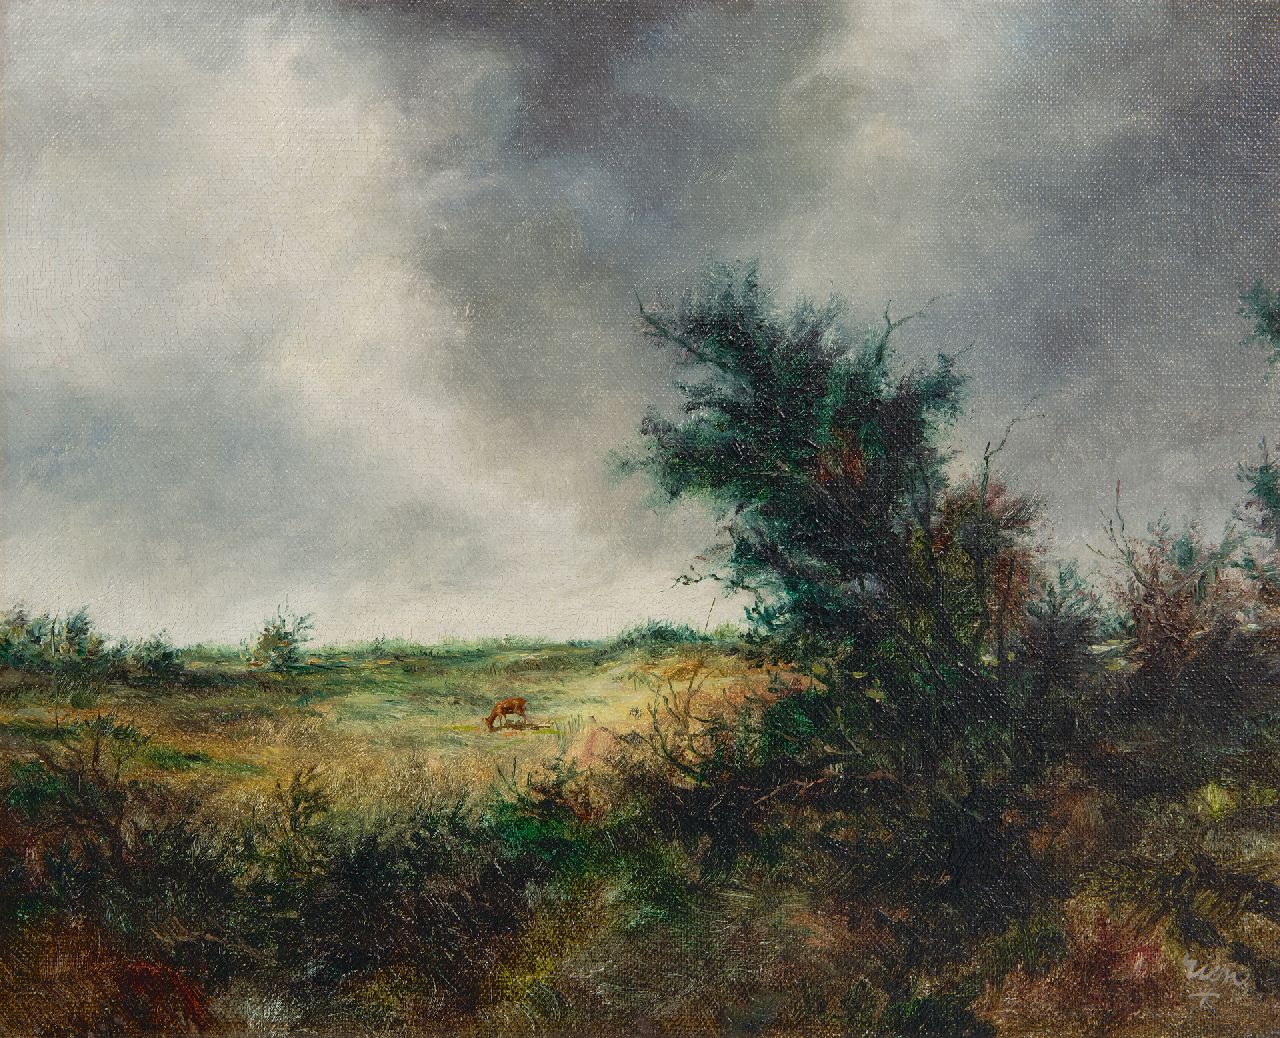 Poortvliet R.  | Rien Poortvliet | Paintings offered for sale | Landscape with grazing deer, oil on canvas 24.6 x 30.2 cm, signed l.r.